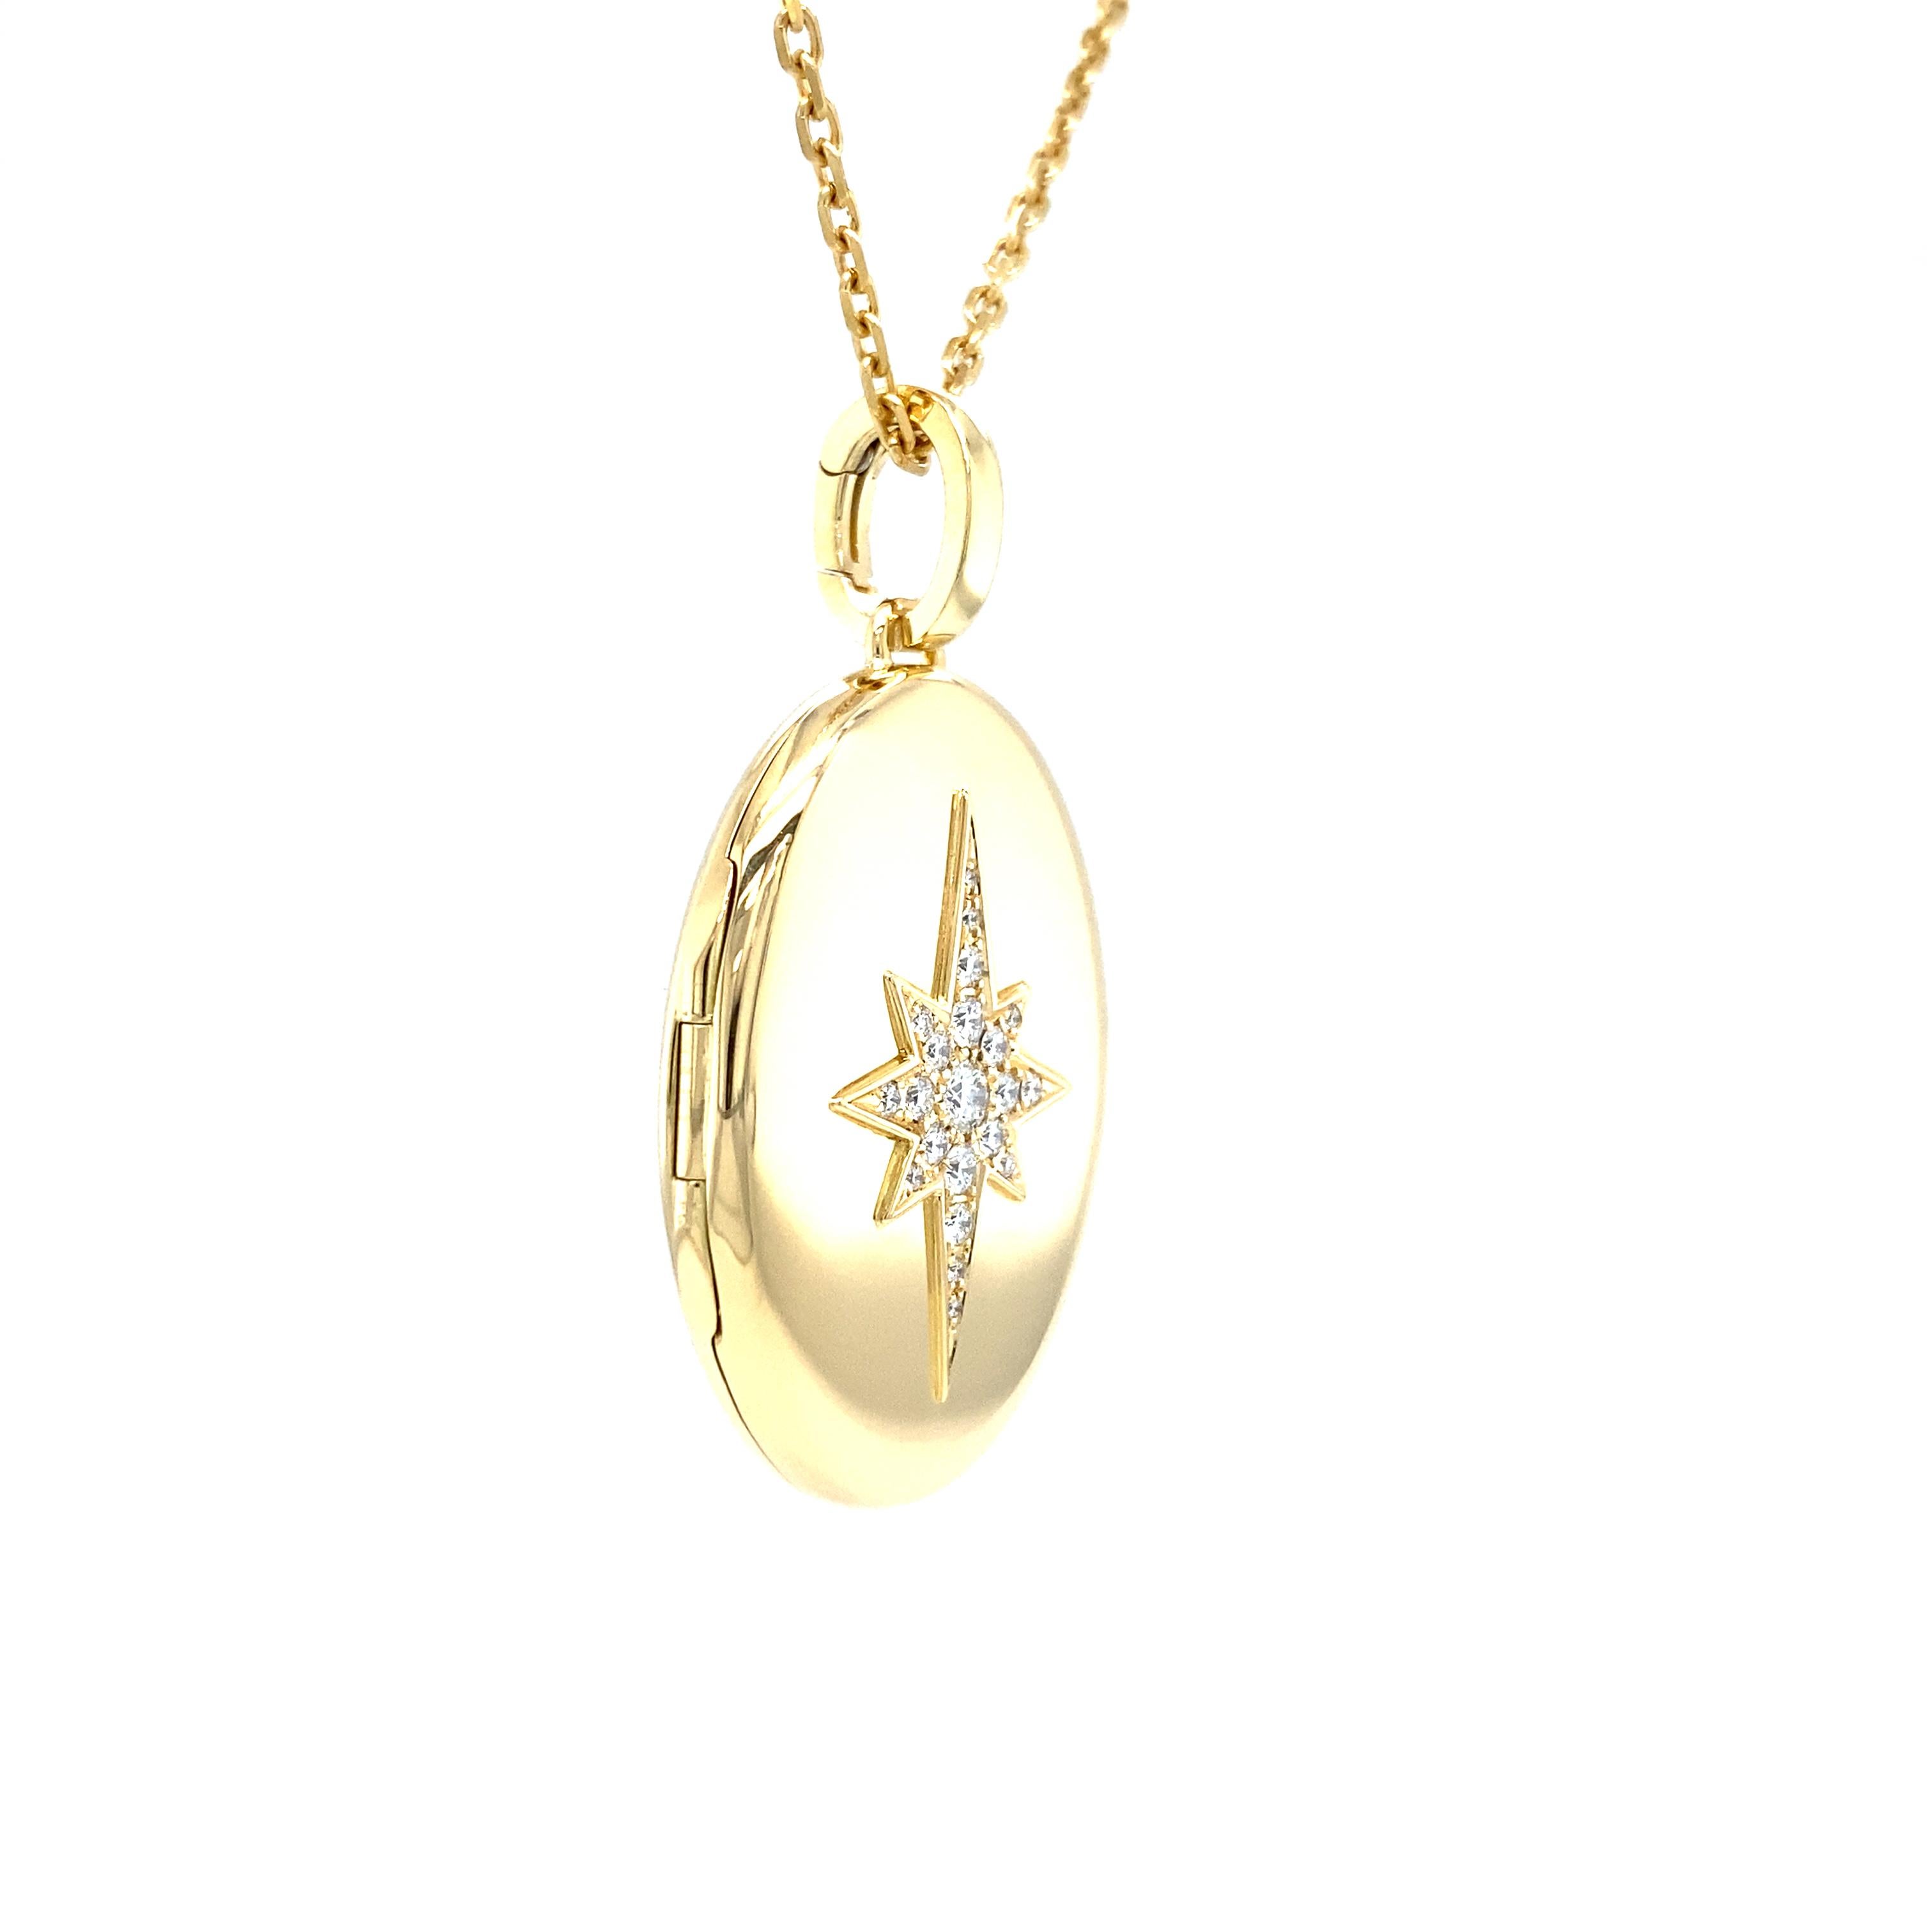 Oval Polished Locket Pendant Necklace - 18k Yellow Gold - 9 Diamonds 0.14ct G VS For Sale 7